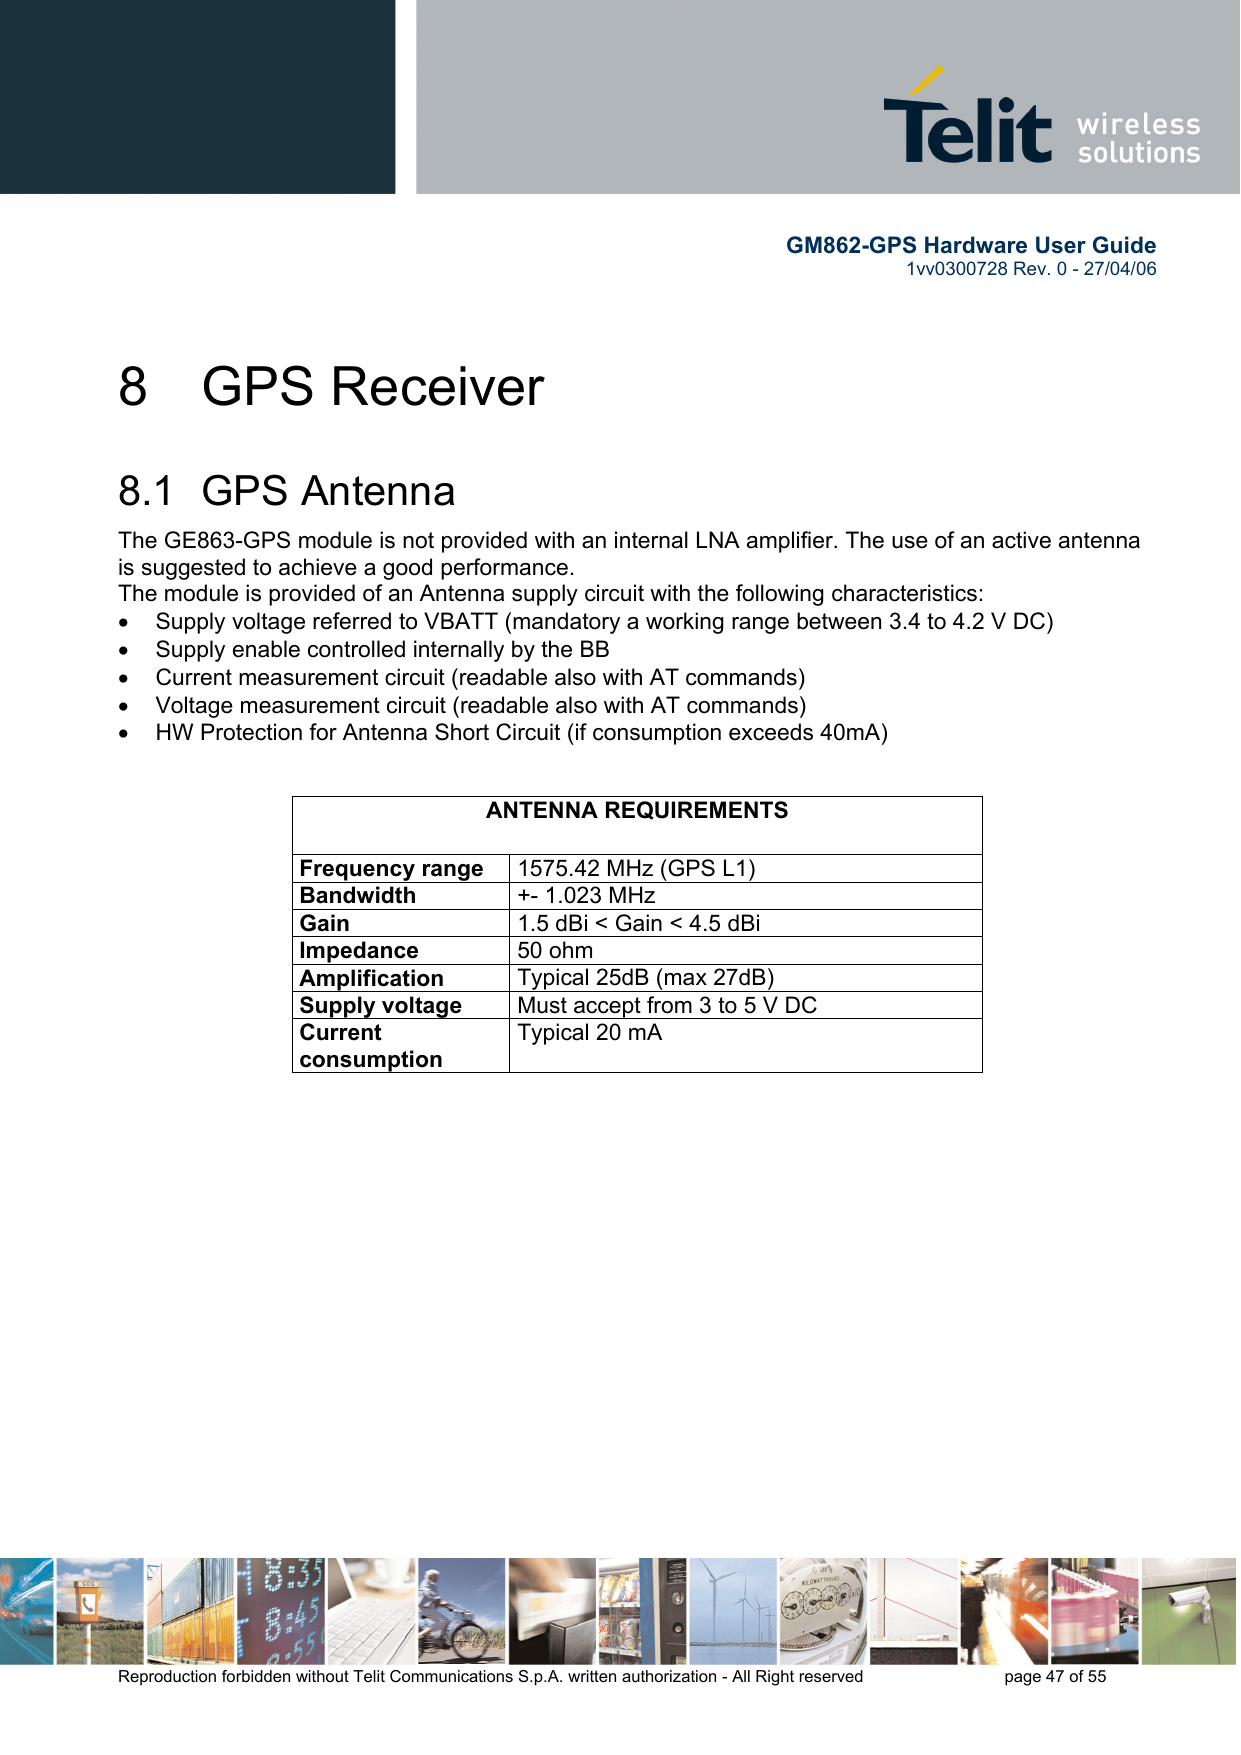        GM862-GPS Hardware User Guide   1vv0300728 Rev. 0 - 27/04/06    Reproduction forbidden without Telit Communications S.p.A. written authorization - All Right reserved    page 47 of 55  8 GPS Receiver 8.1 GPS Antenna The GE863-GPS module is not provided with an internal LNA amplifier. The use of an active antenna is suggested to achieve a good performance. The module is provided of an Antenna supply circuit with the following characteristics: •  Supply voltage referred to VBATT (mandatory a working range between 3.4 to 4.2 V DC) •  Supply enable controlled internally by the BB •  Current measurement circuit (readable also with AT commands) •  Voltage measurement circuit (readable also with AT commands) •  HW Protection for Antenna Short Circuit (if consumption exceeds 40mA)   ANTENNA REQUIREMENTS Frequency range  1575.42 MHz (GPS L1) Bandwidth  +- 1.023 MHz Gain  1.5 dBi &lt; Gain &lt; 4.5 dBi Impedance  50 ohm Amplification  Typical 25dB (max 27dB) Supply voltage  Must accept from 3 to 5 V DC Current consumption Typical 20 mA    